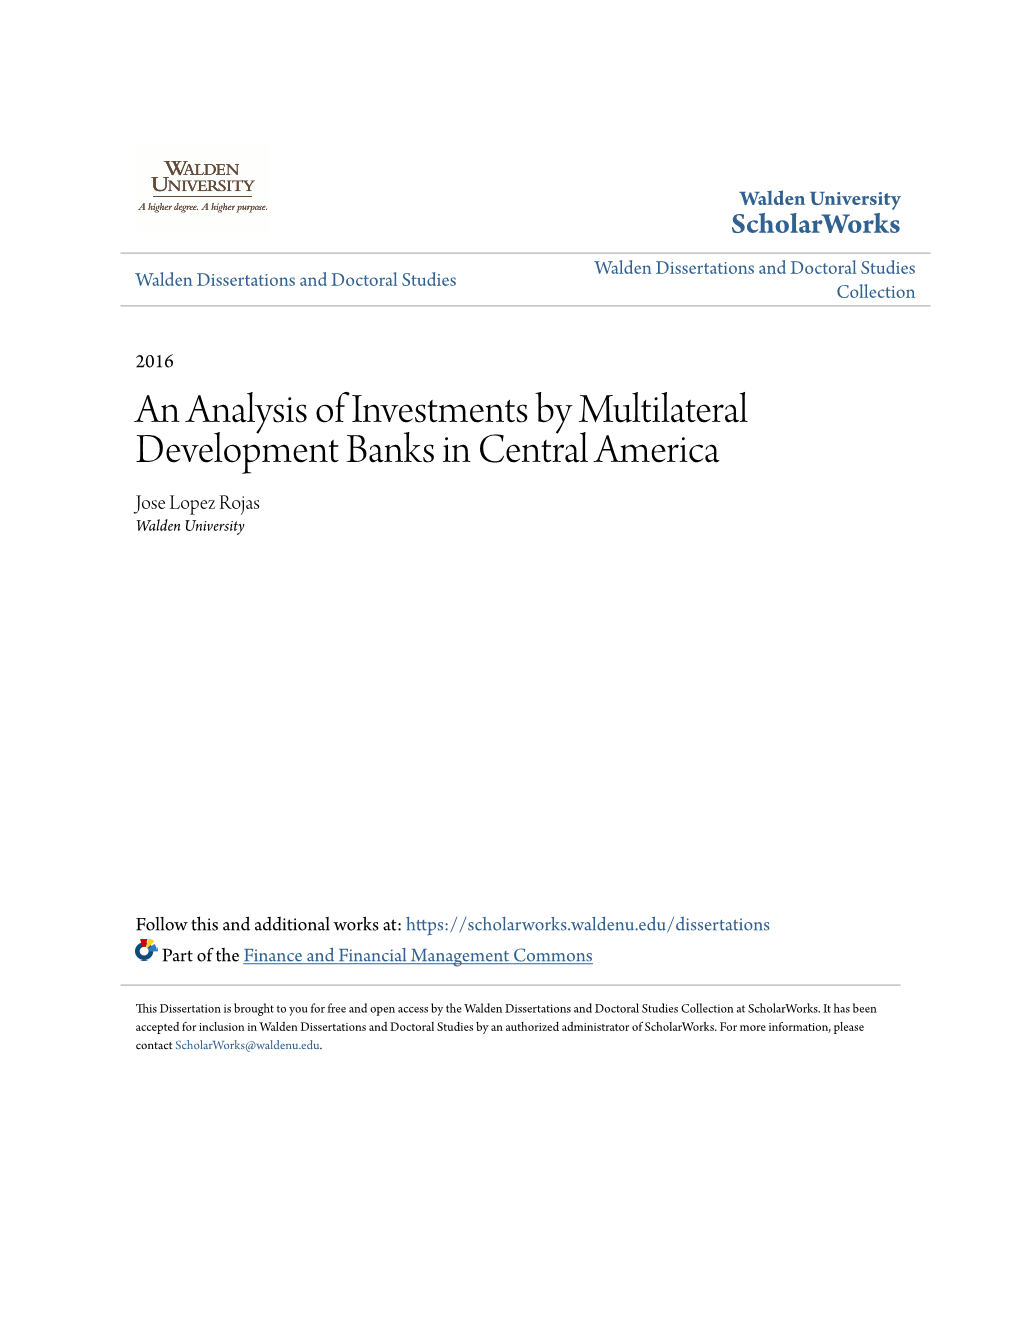 An Analysis of Investments by Multilateral Development Banks in Central America Jose Lopez Rojas Walden University